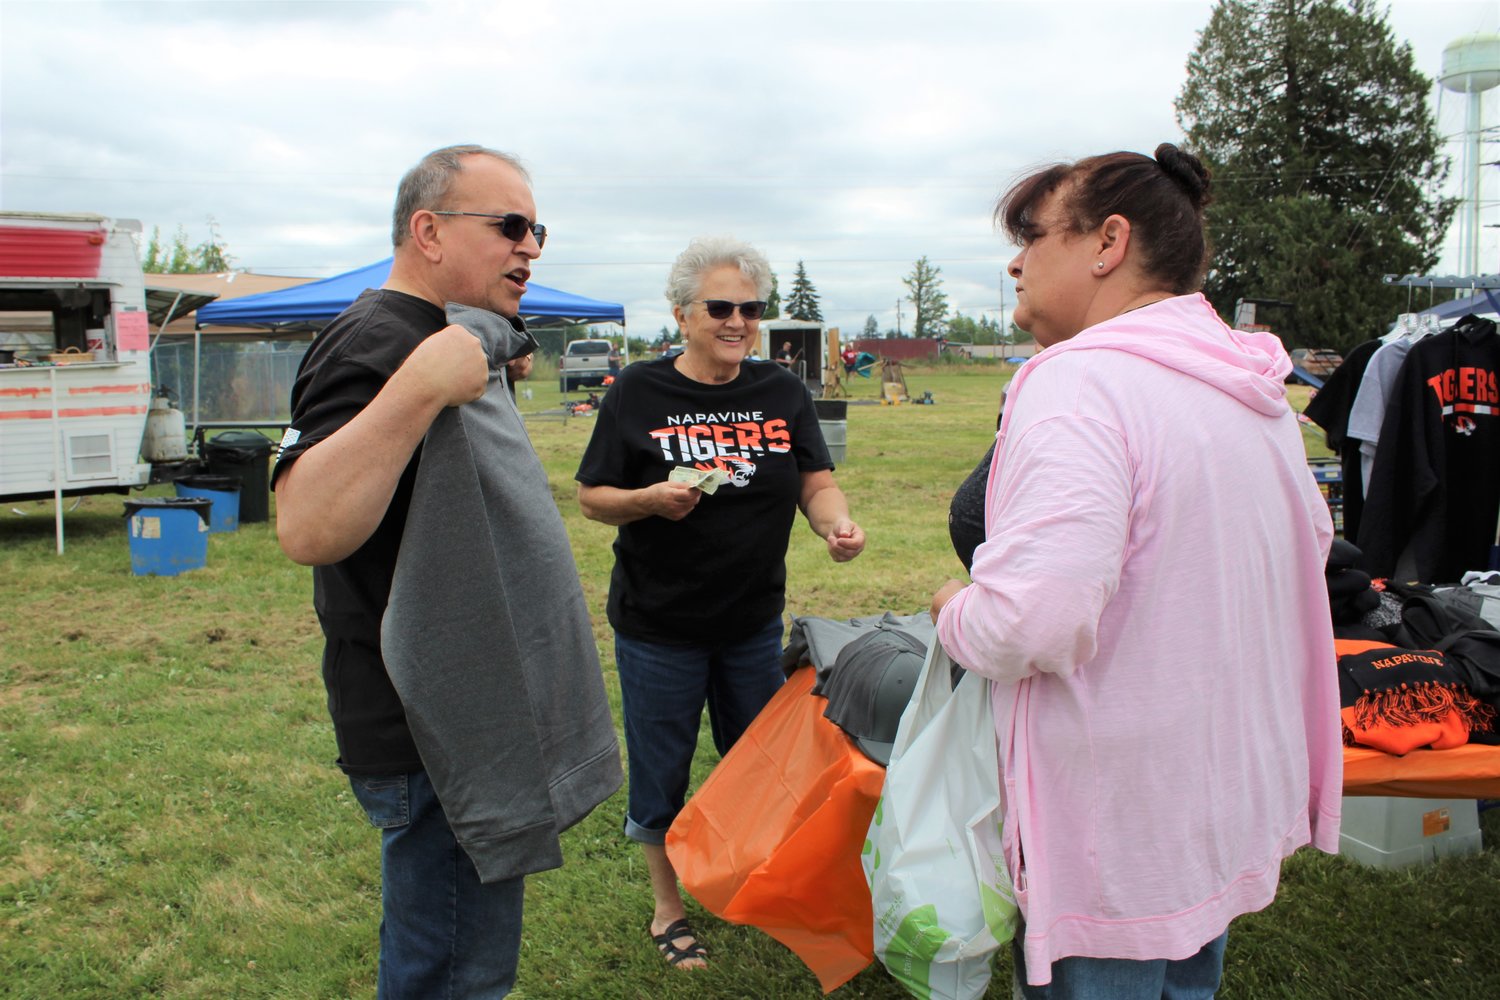 Fairly new Napavine residents Doug and Monique Ship buy some hometown swag from Marianne Wilcox at the Napavine Booster Club booth at Napavine Funtime Festival.